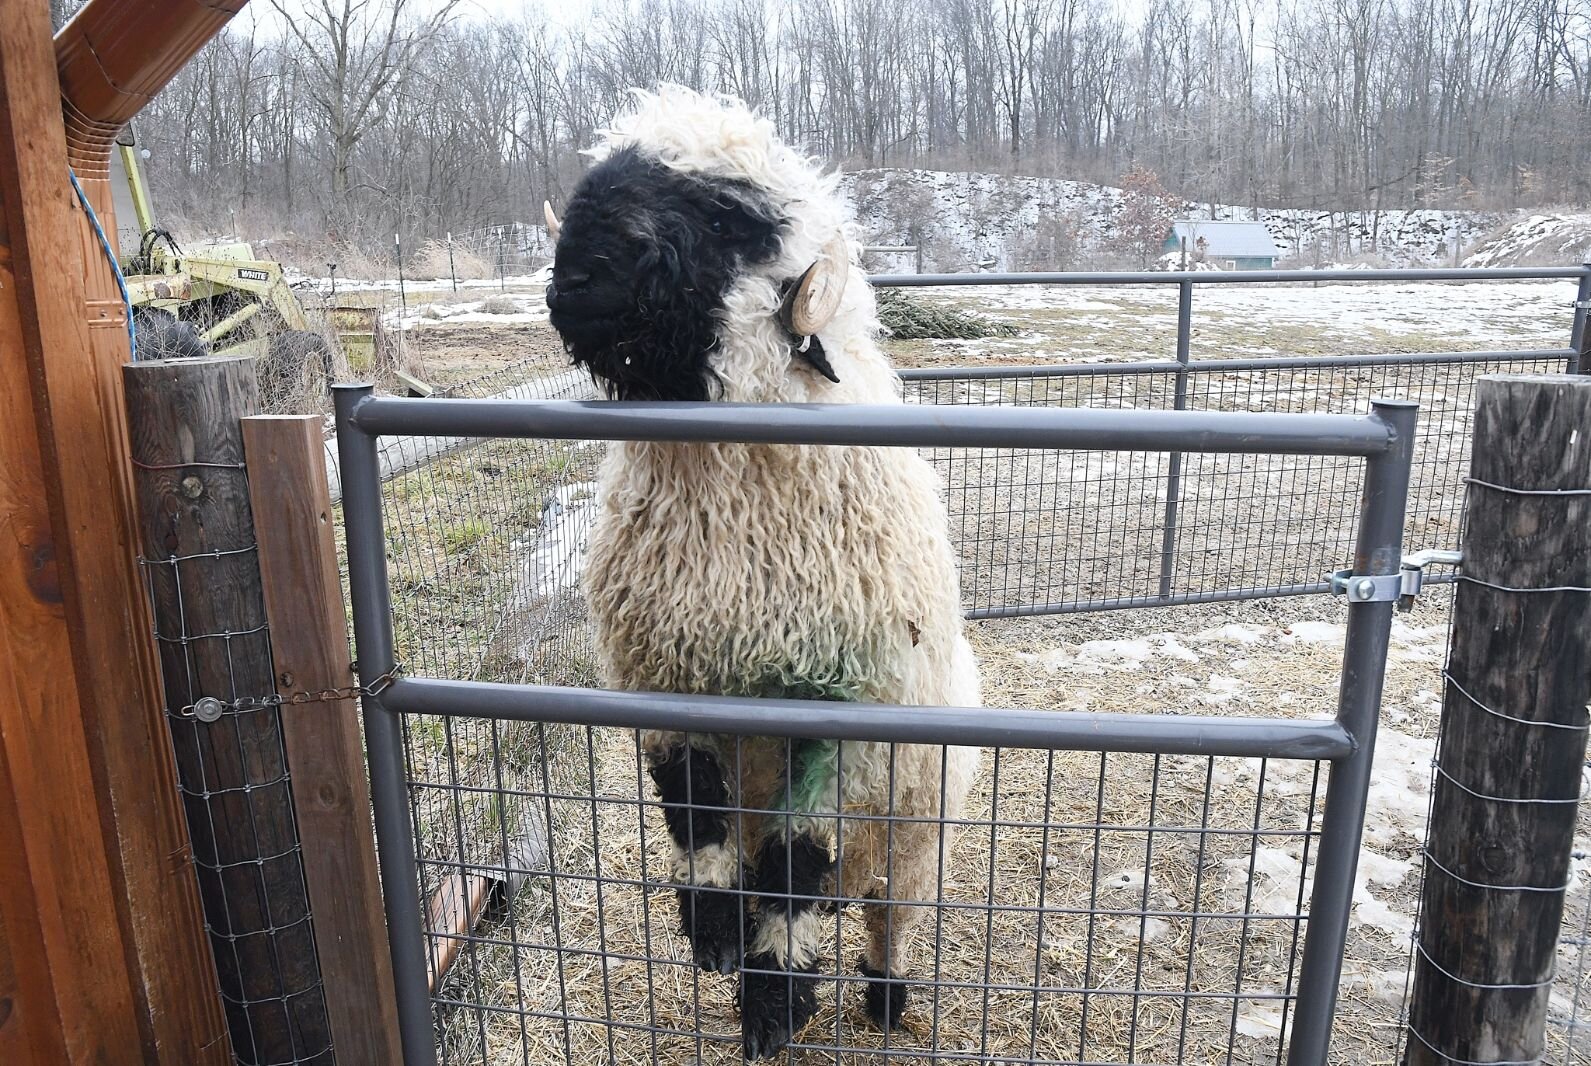 Rambo, a Valais Blacknose sheep, stares out of a pen on the Zebolsky’s farm.